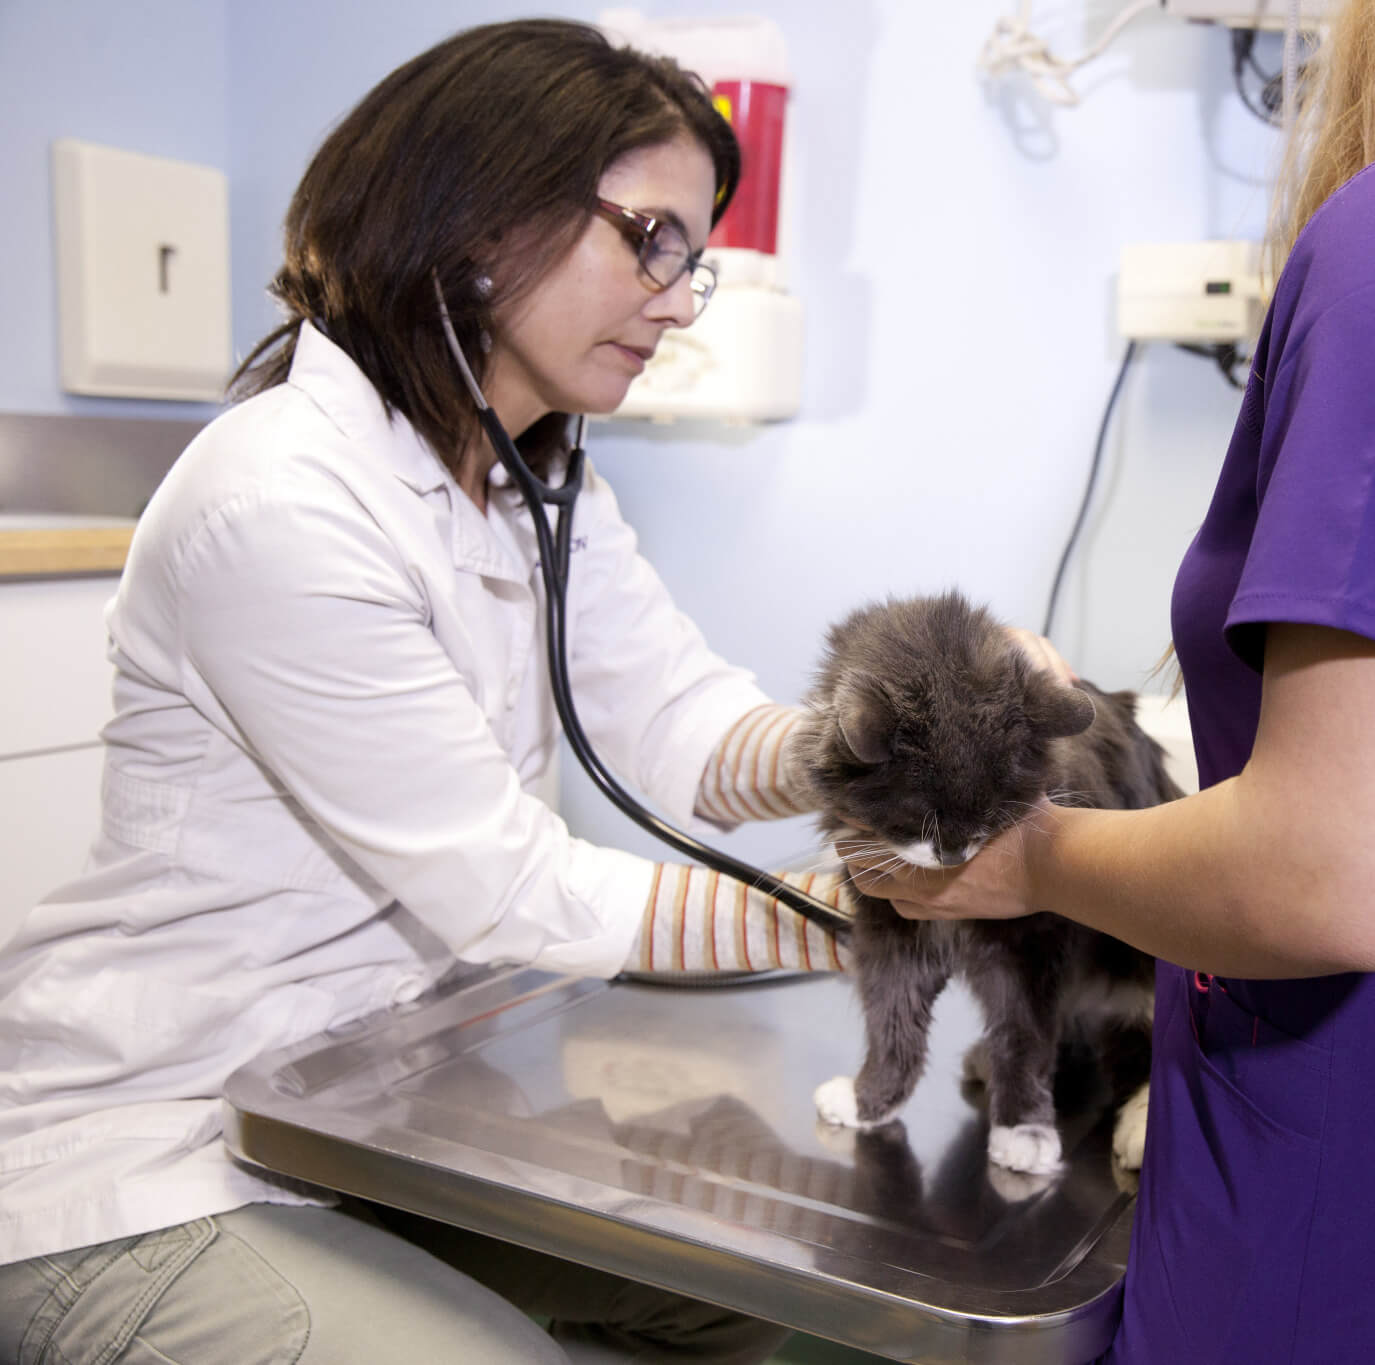 Dr. Susan using a stethoscope to check the health of a cat